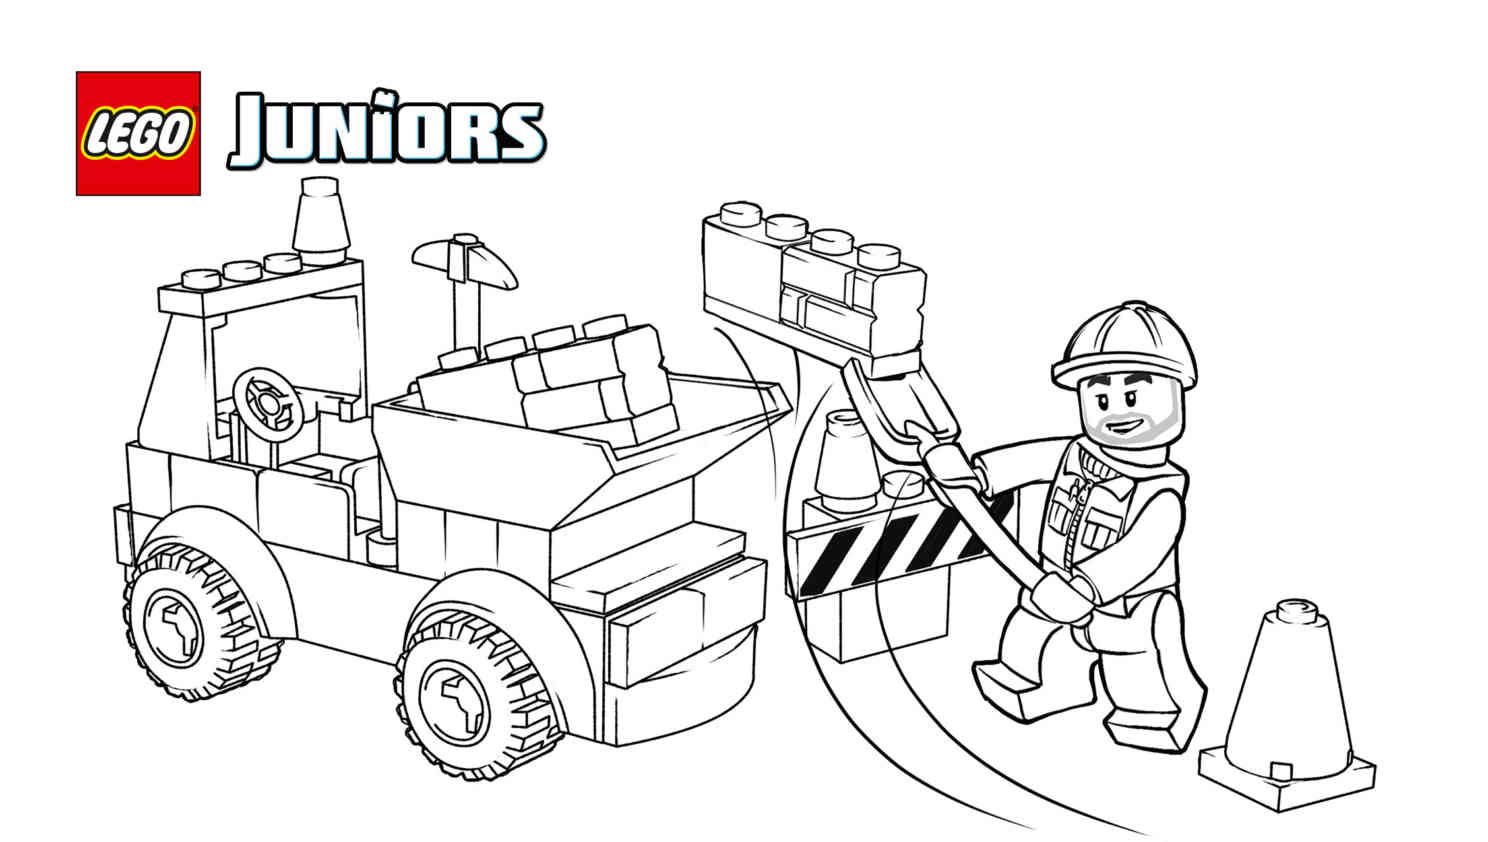 Coloring pages - Activities | Truck coloring pages, Coloring pages,  Birthday coloring pages